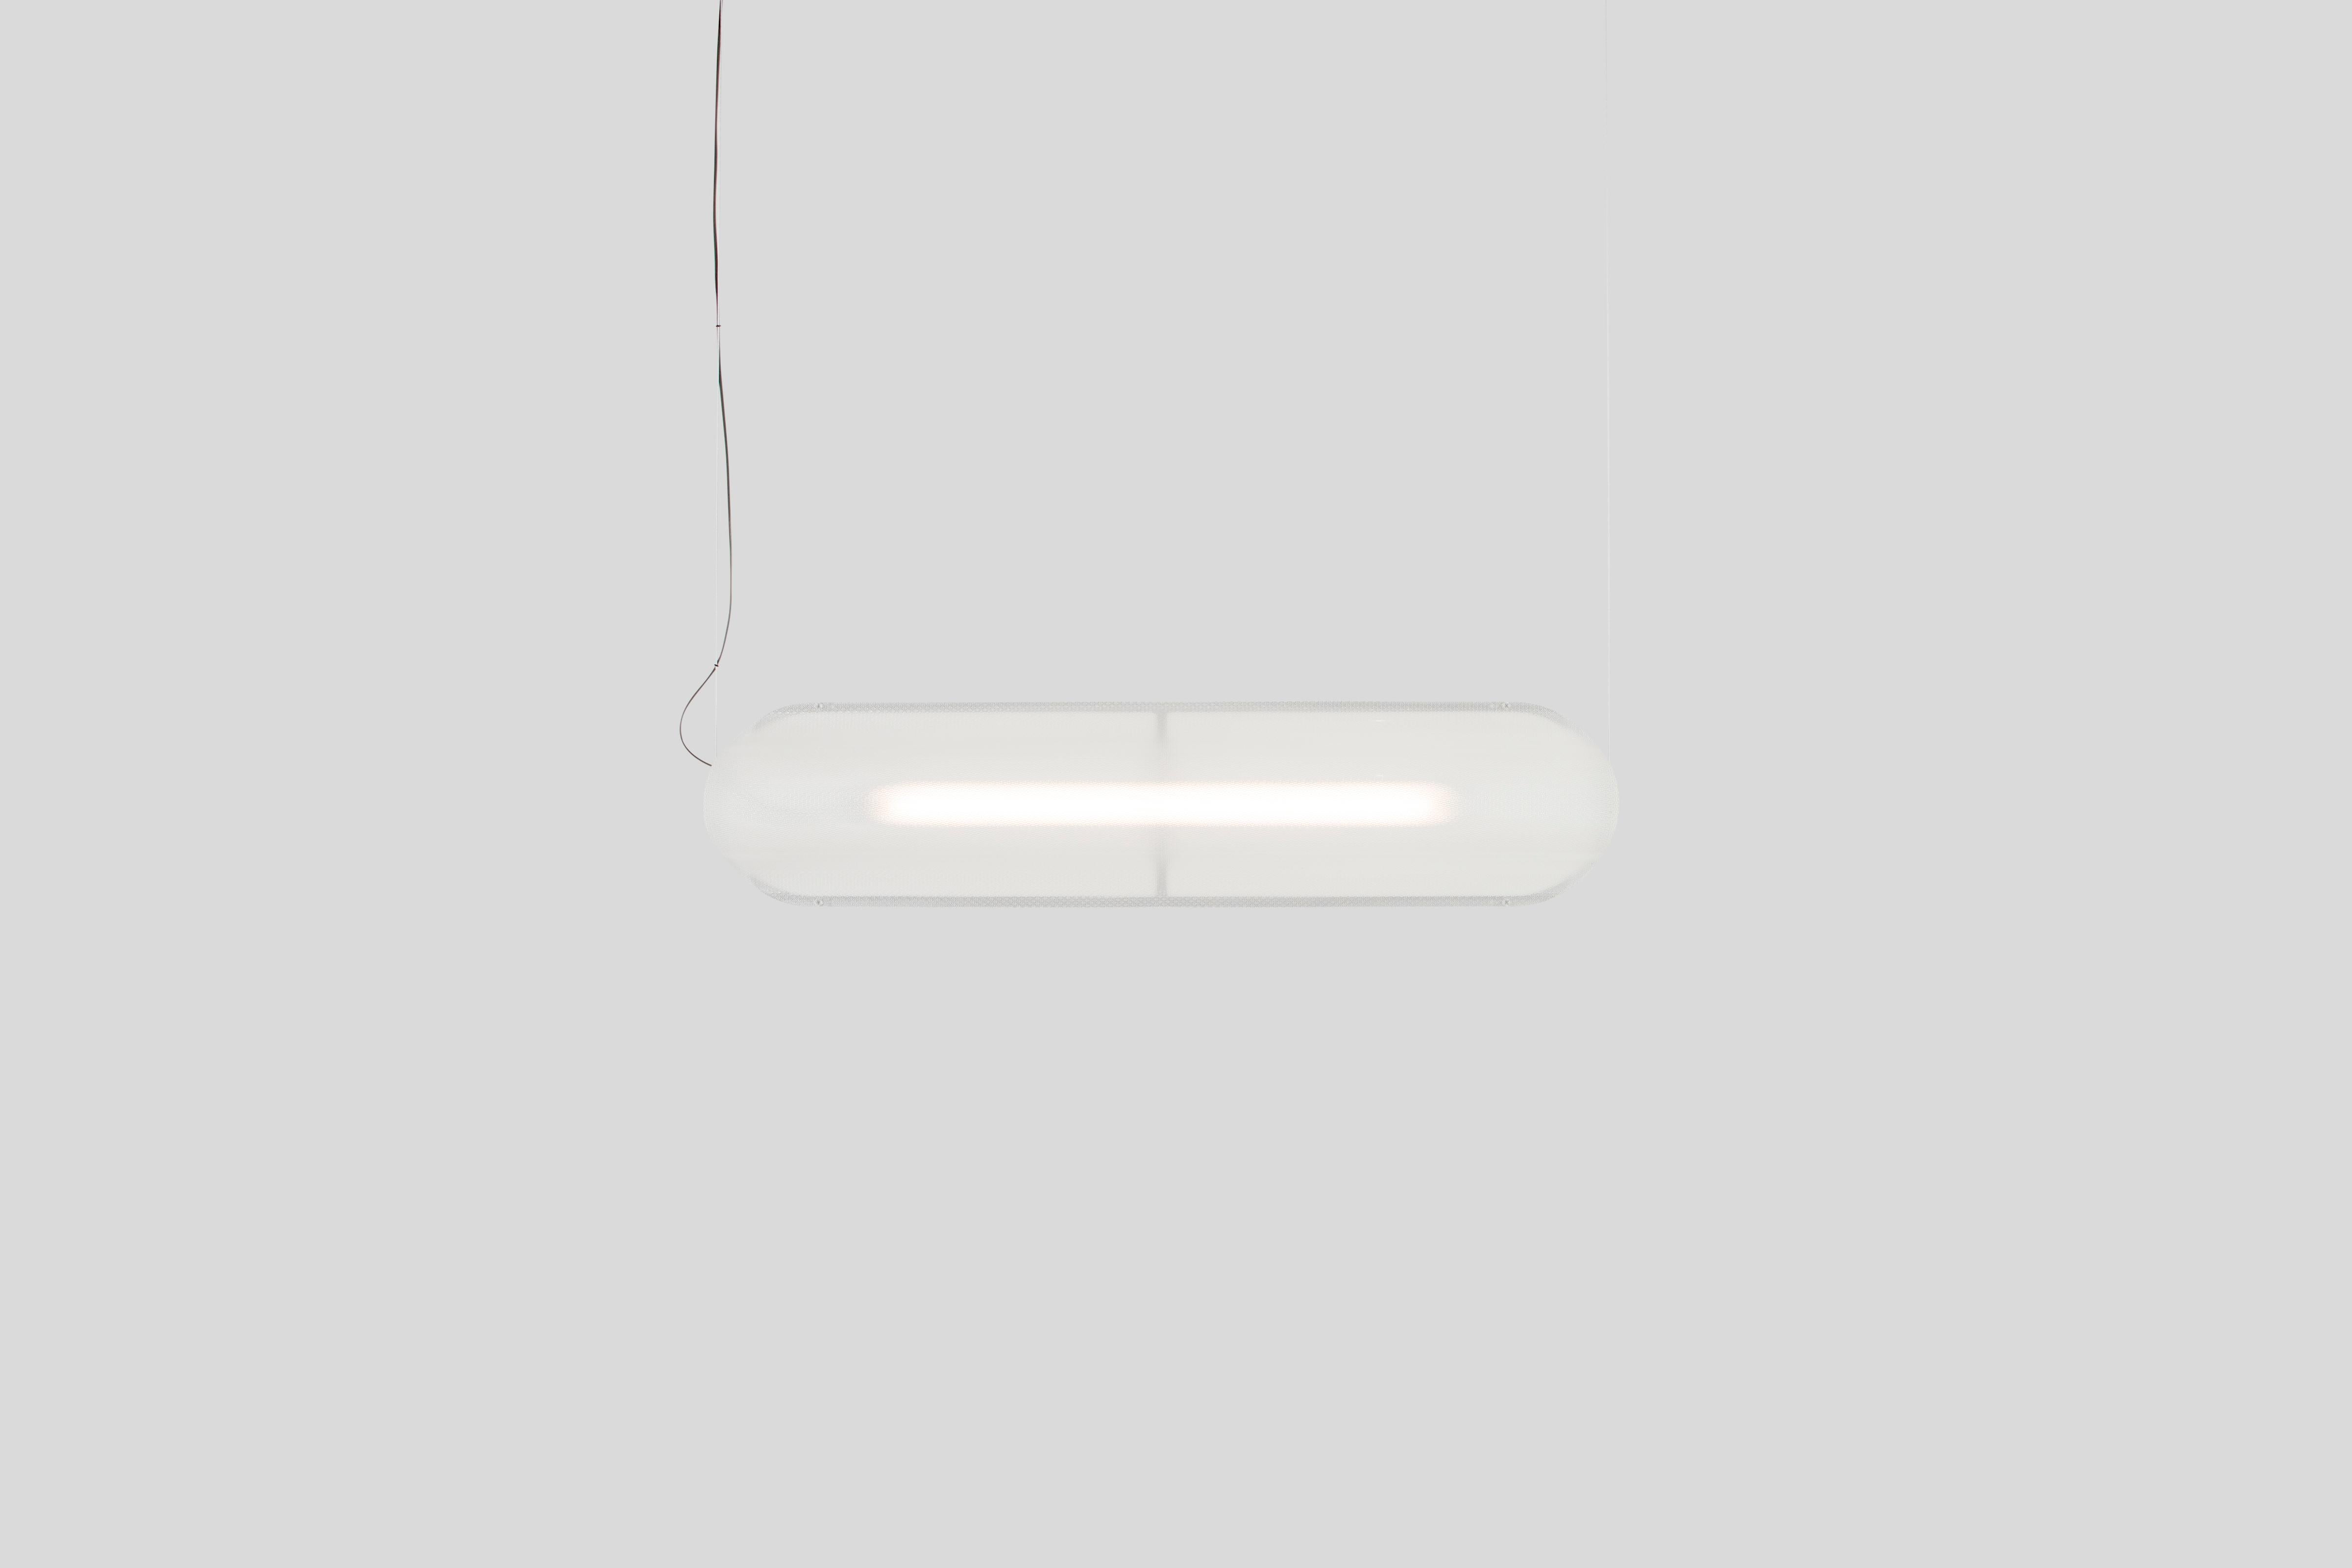 VALE, pendant lamp
Design: Caine Heintzman, Editor: ANDLight

The Vale series optimises functionality through its multidirectional luminescence while diffusing soft ambient light.

Materials
– Acrylic
– Aluminum

Dimensions
102 x 30 x 23